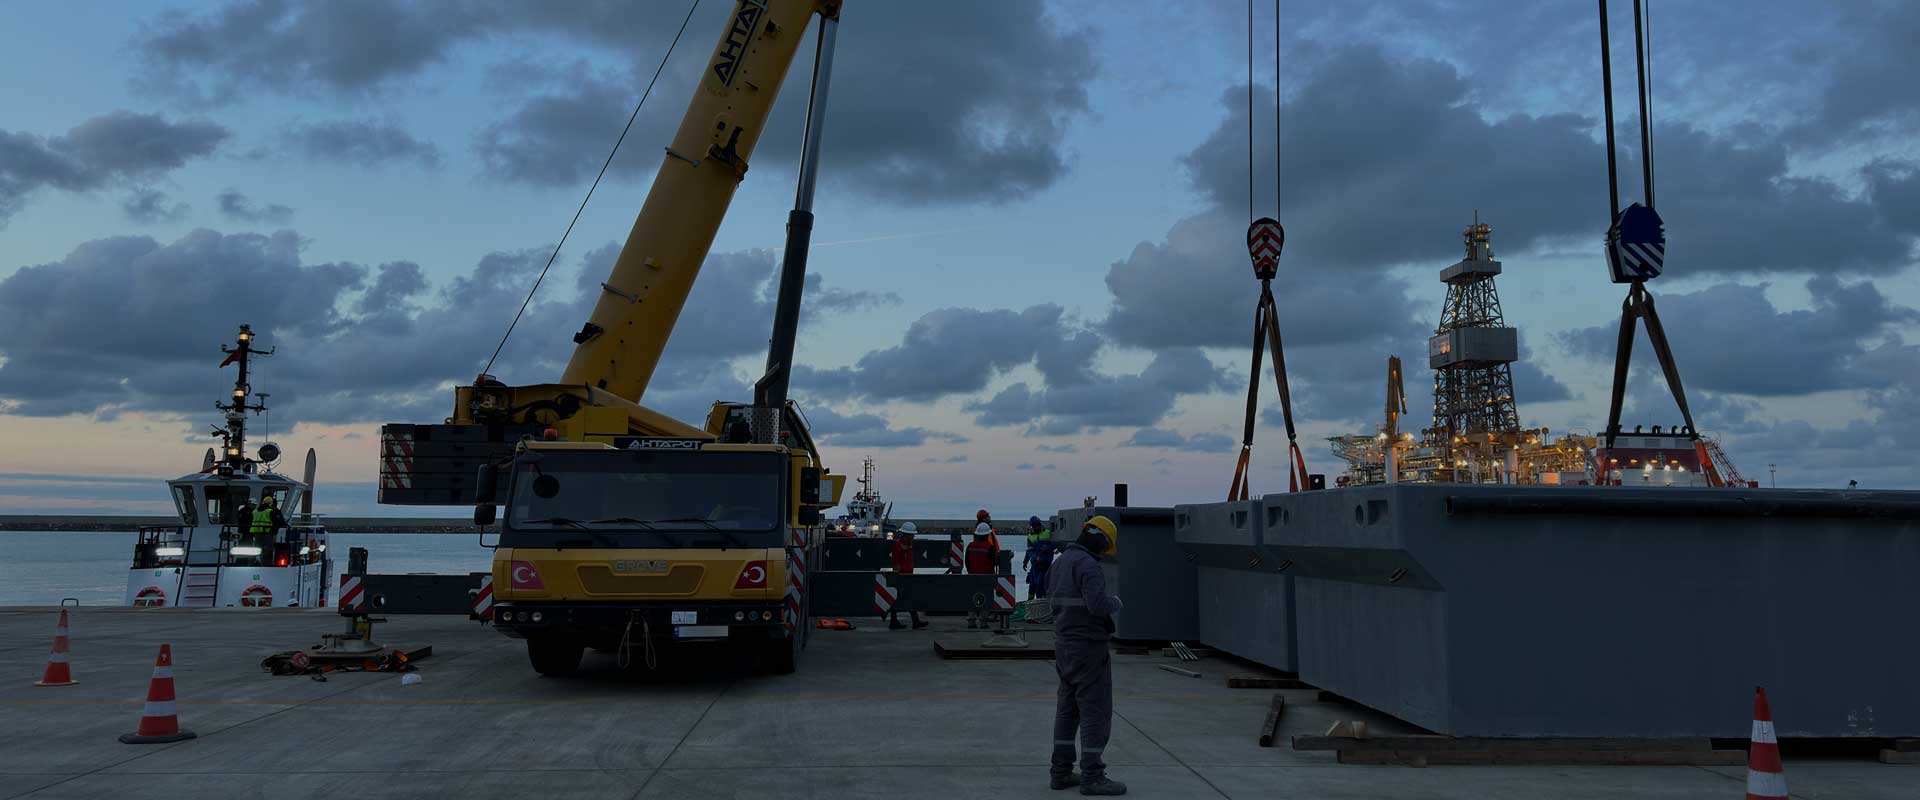 floating-product-construction-site-lifting